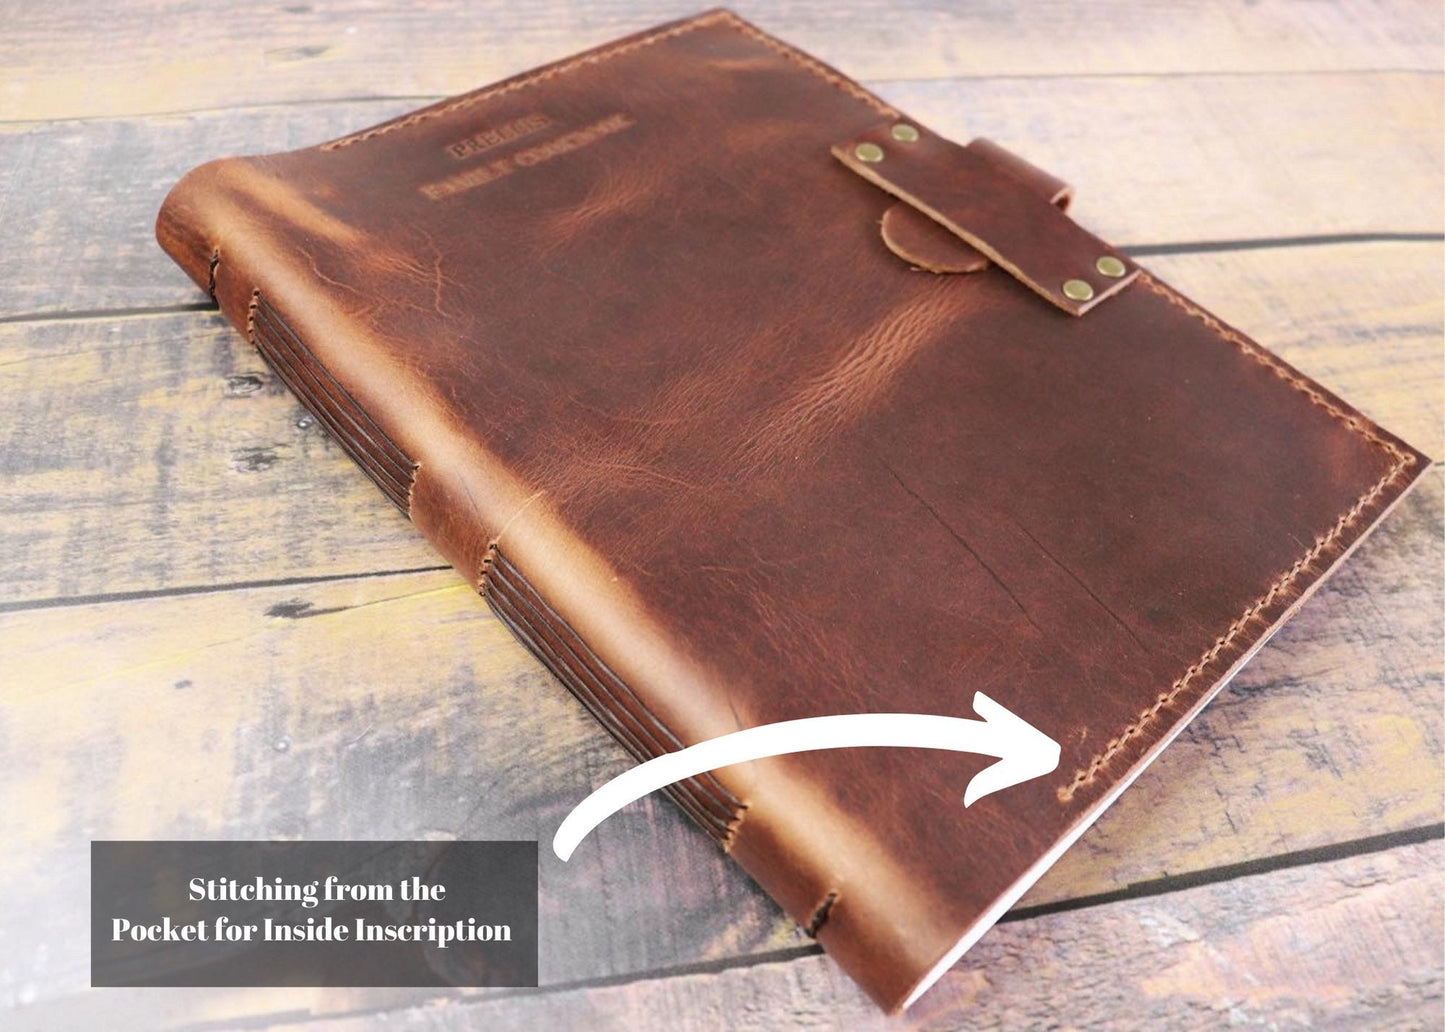 Add This Listing To Your Order For An Inscription or Message On Inside Journal Cover, Personalization, Engraving, Genuine Full Grain Leather